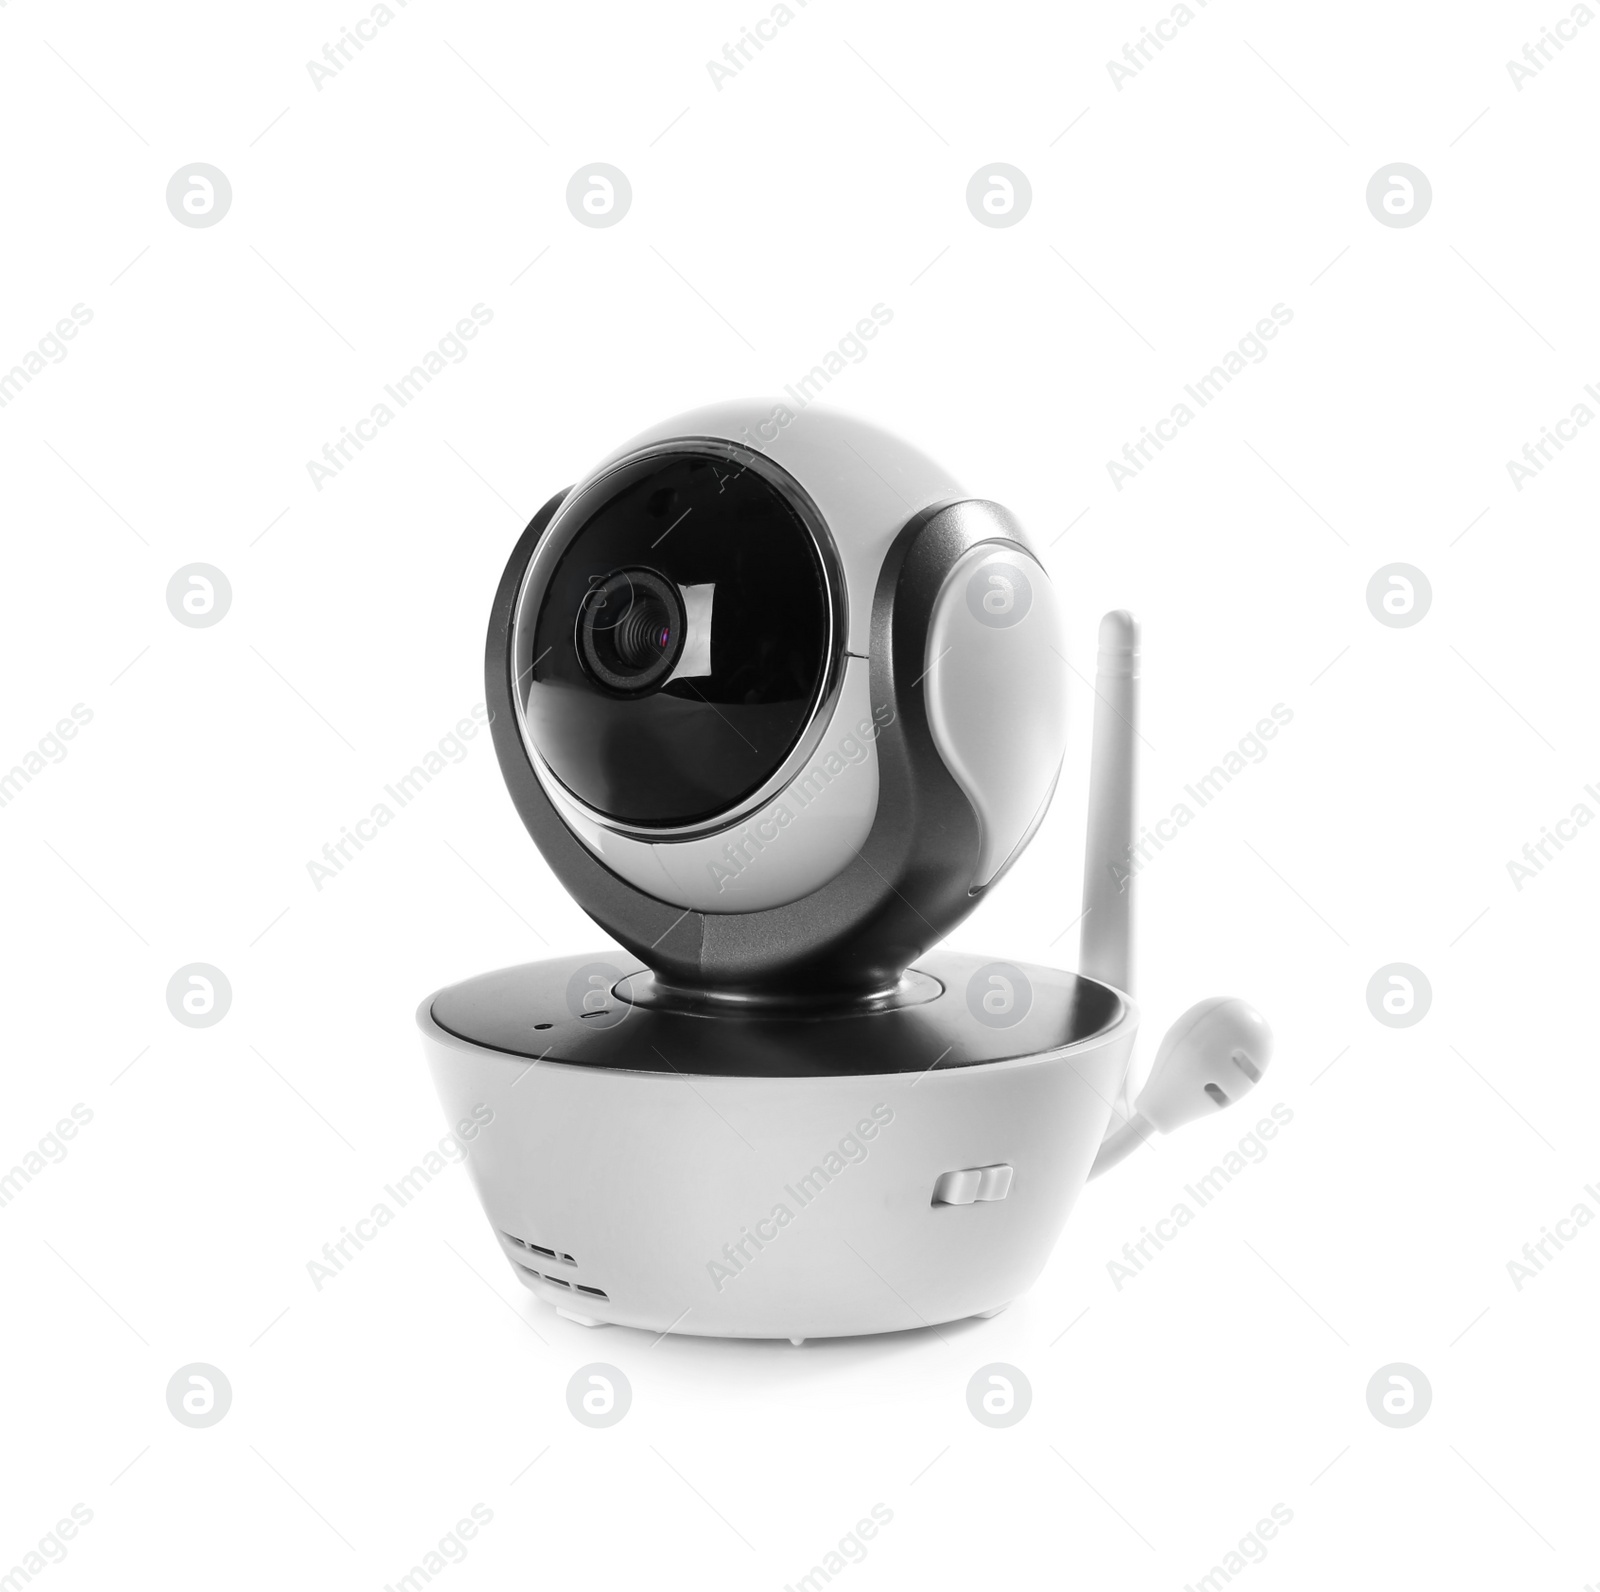 Photo of Modern CCTV security camera on white background